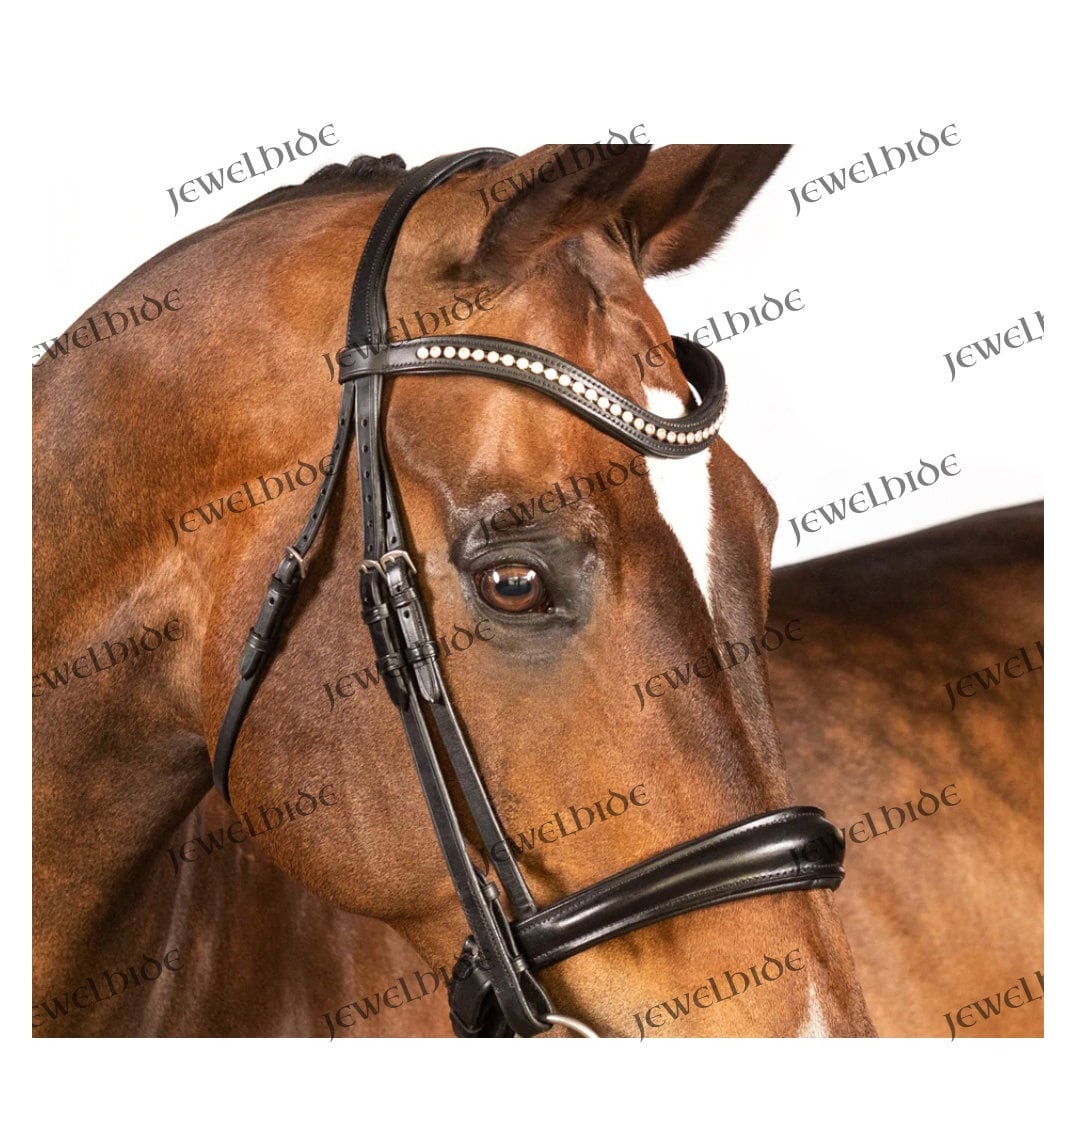 Beautiful Patent leather bridle with detailed browband size Full Black 